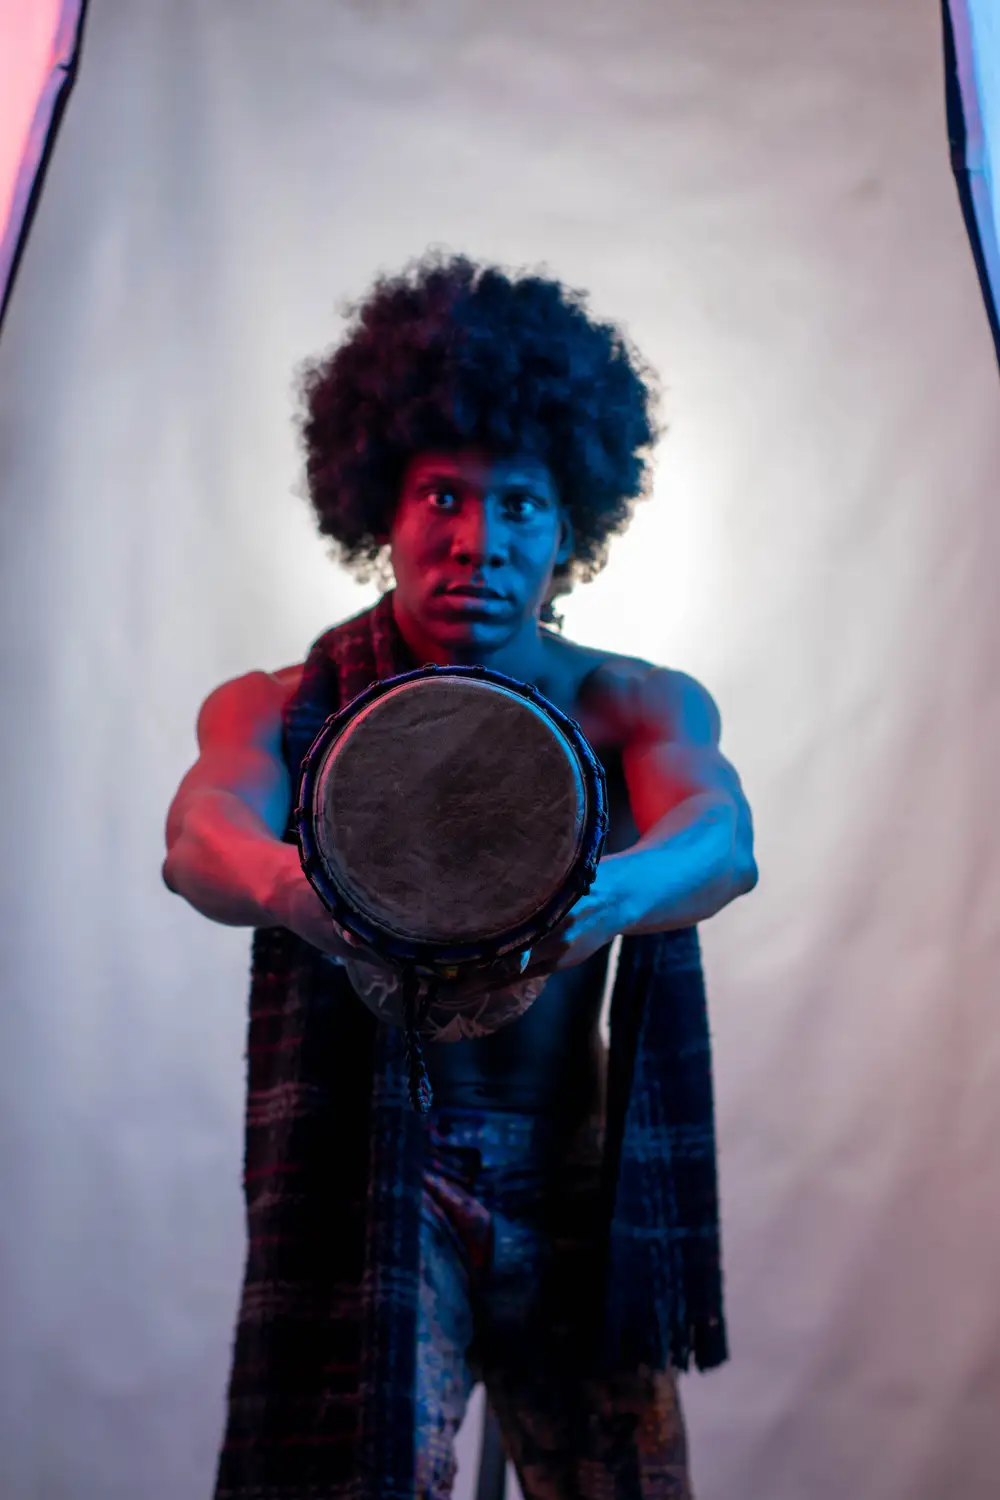 model on afro hairstyle holds his drum